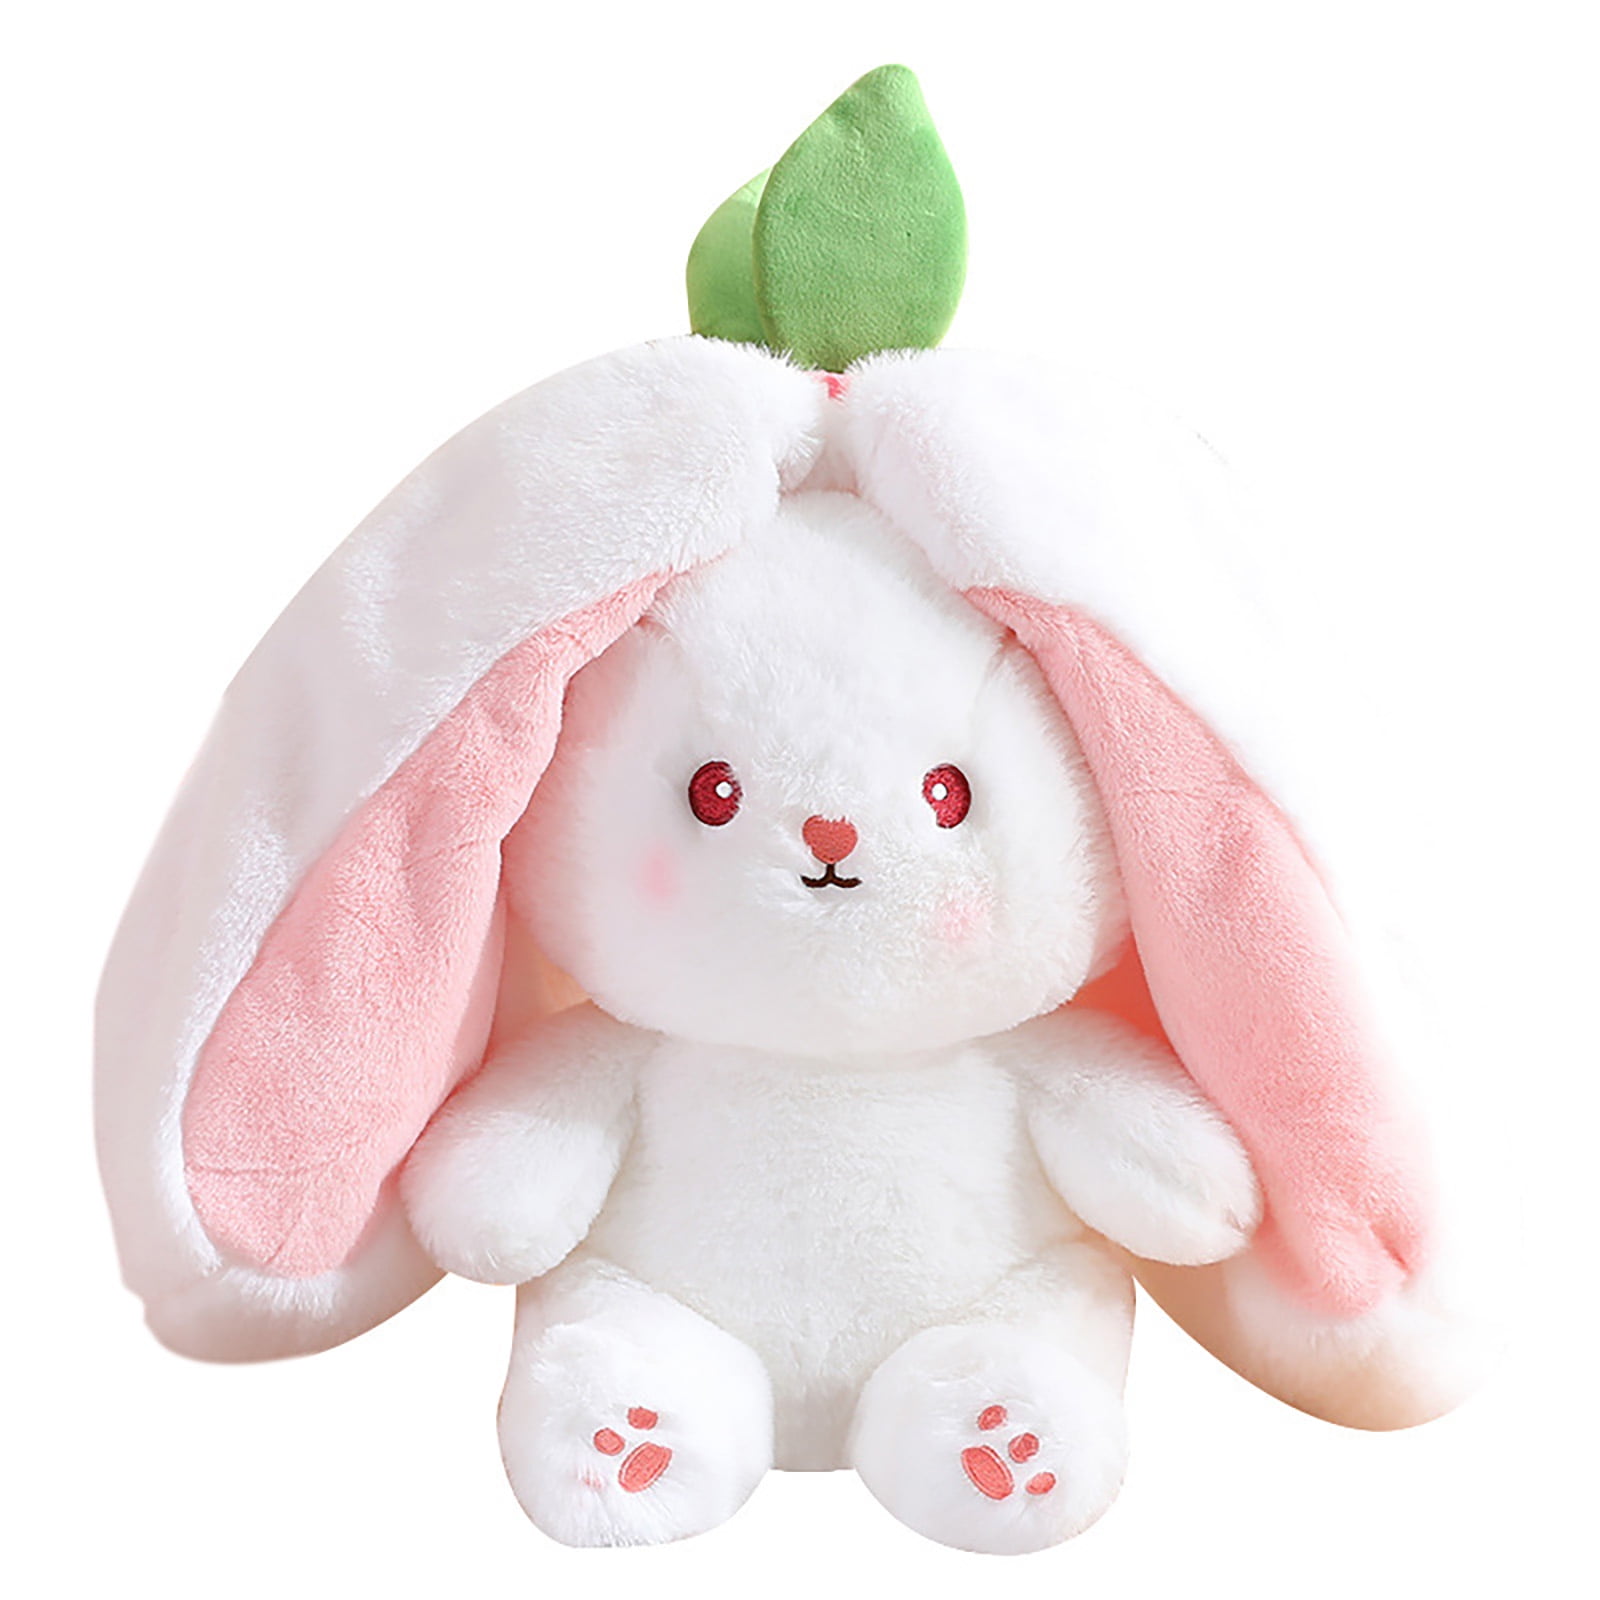 Adorable Kawaii Cartoon Bunny Bunzo Bunny Plush  Soft Stuffed Fat  Rabbit Toy For Sleeping, Weddings, And Decor Available In 70cm And 100cm  Sizes DY50274 From Dorimytrader, $45.89